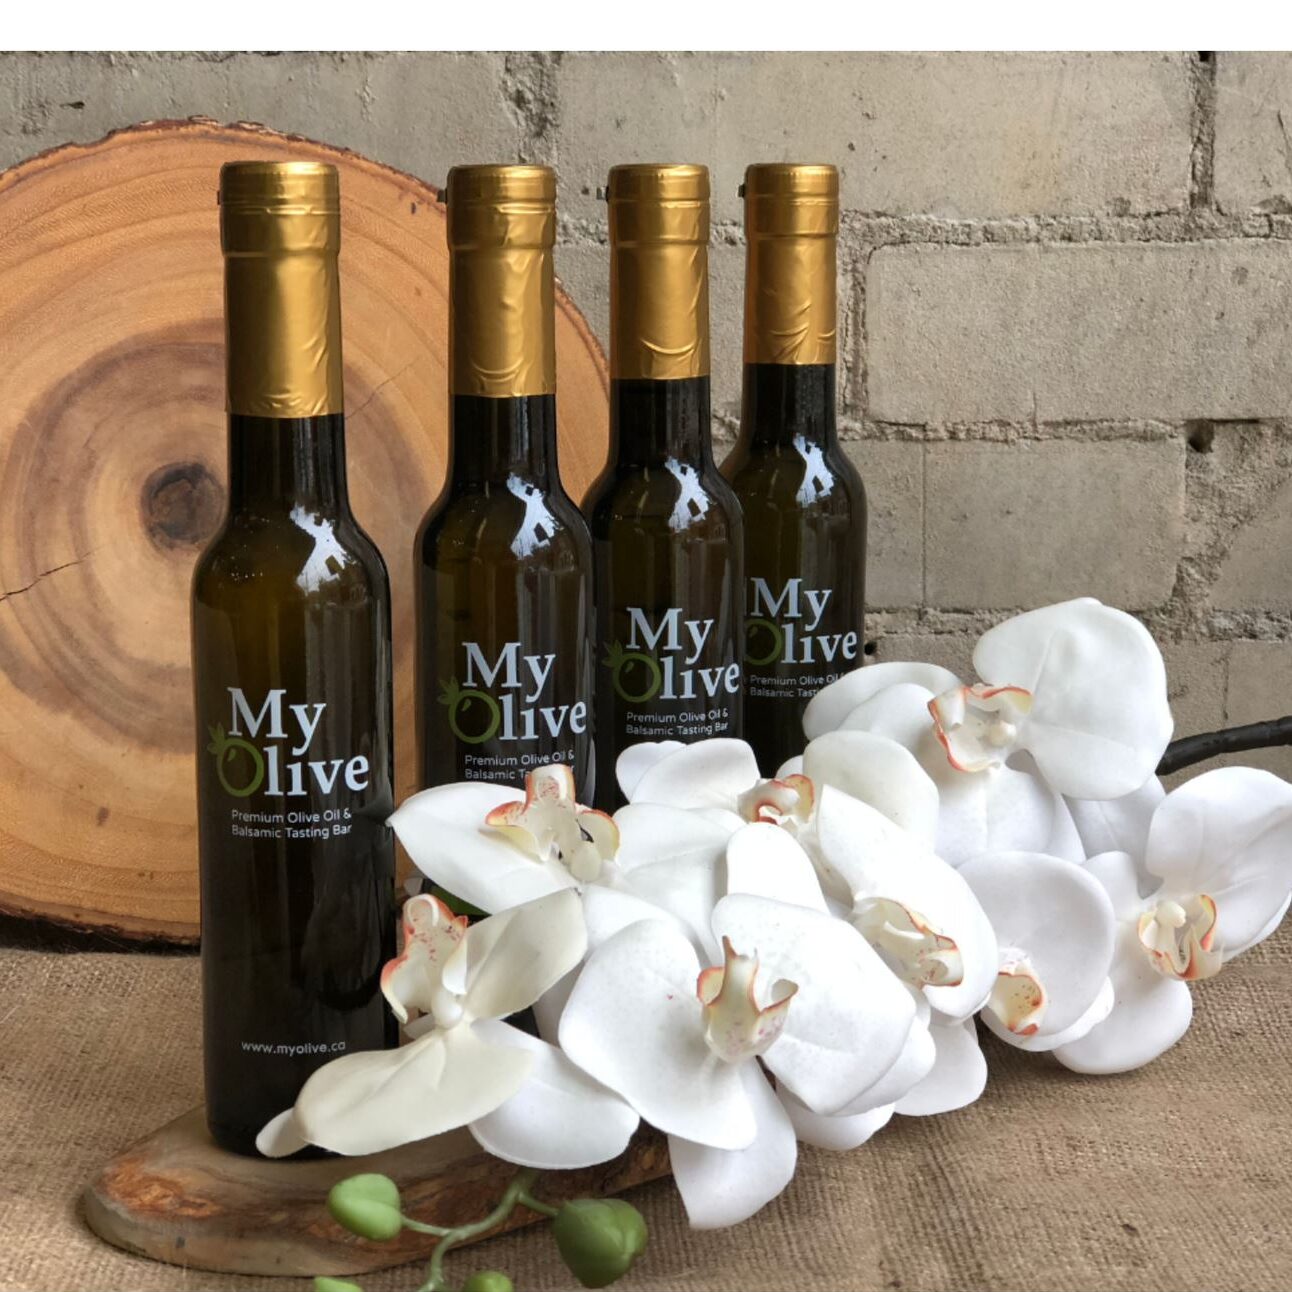 Image of four bottles of My Olive olive oil in succession with some orchids in the foreground.